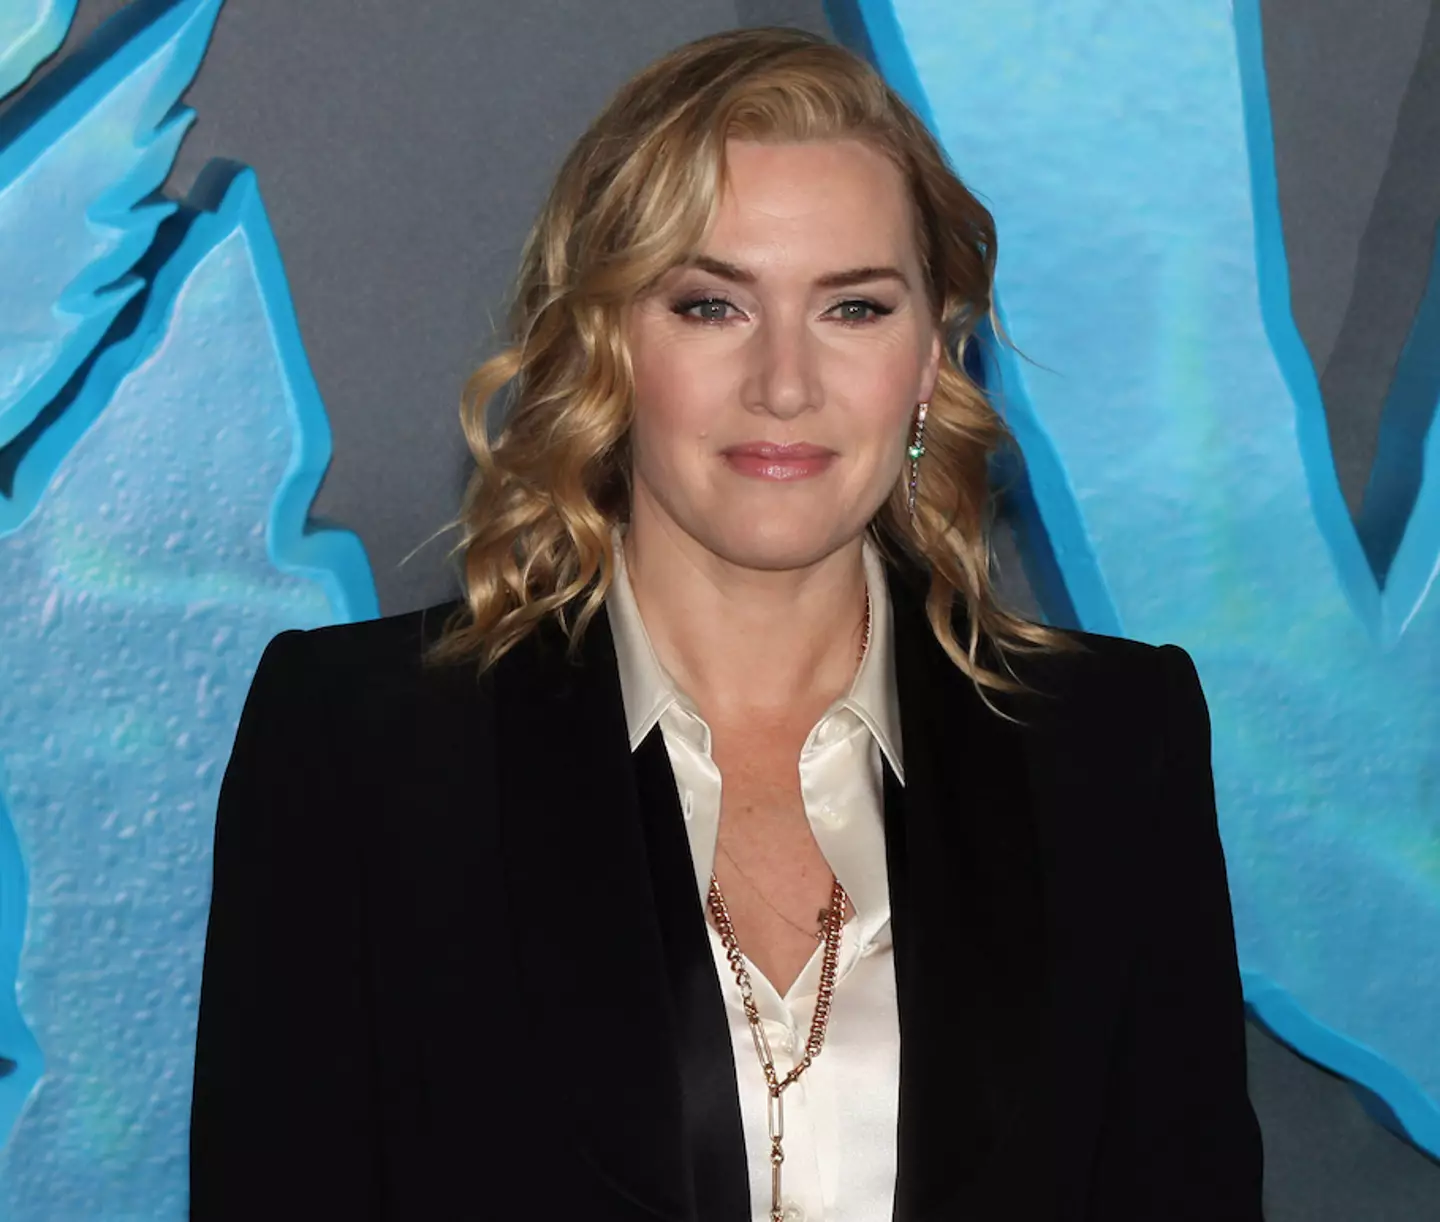 Winslet said she and Mia drew on personal experience.